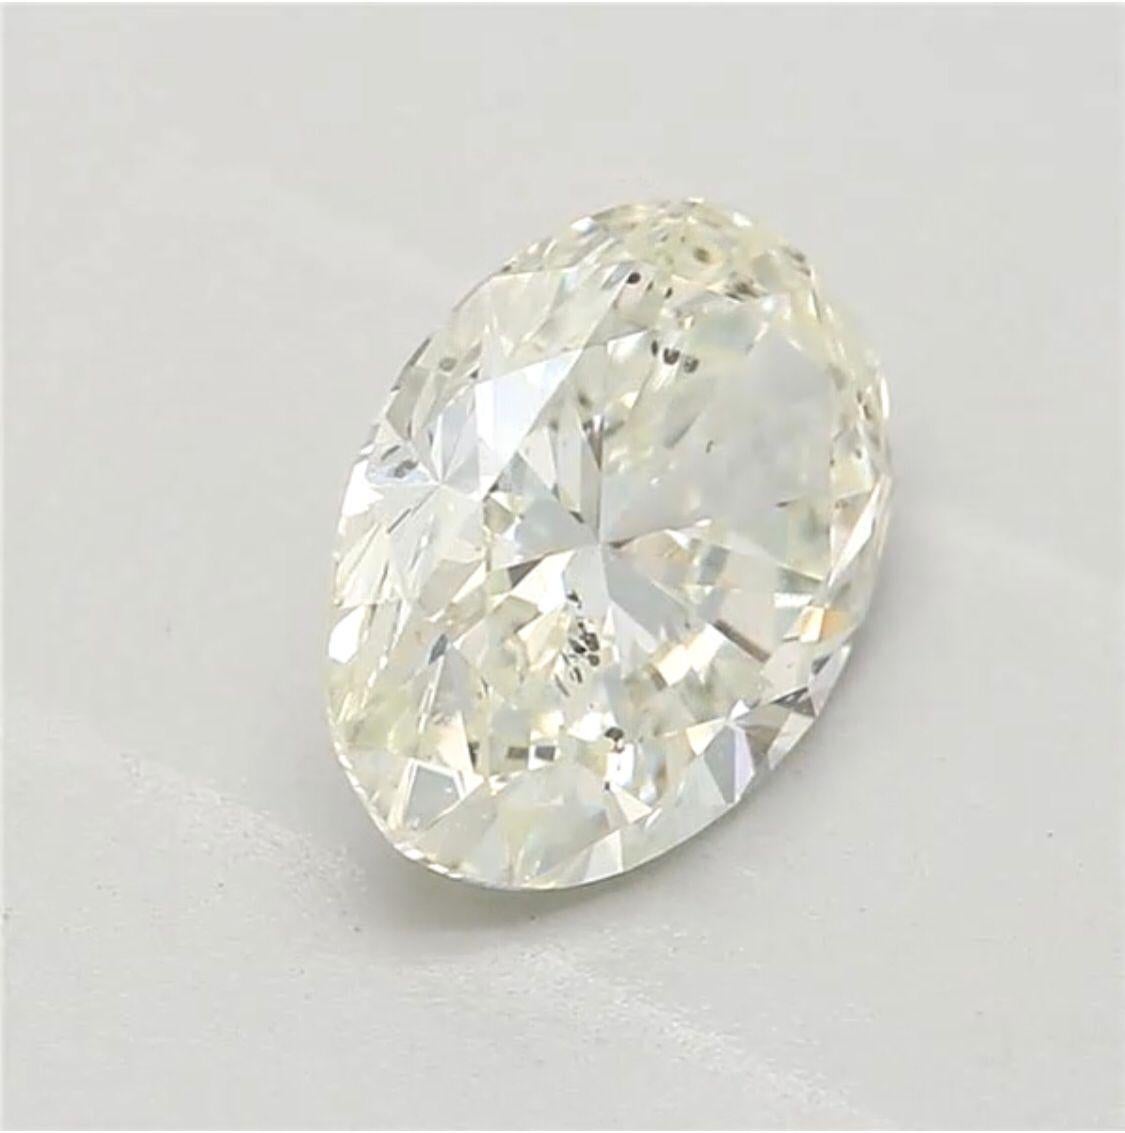 Oval Cut 0.81 Carat Very Light Yellow Green Oval cut diamond SI2 Clarity GIA Certified For Sale